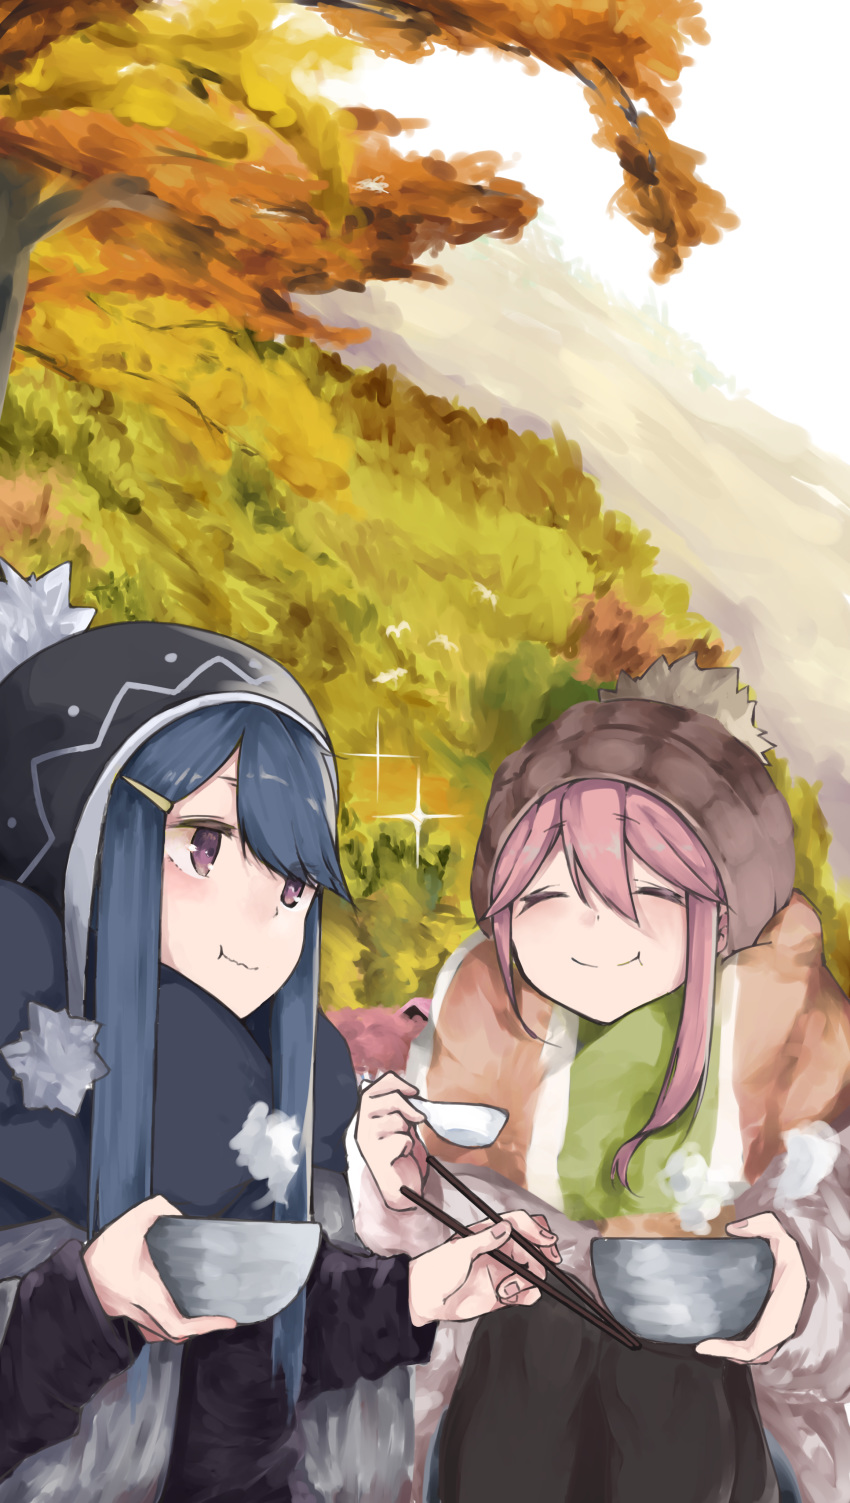 2girls :t absurdres autumn_leaves blue_hair bowl chopsticks closed_eyes commentary eating hat highres holding holding_bowl holding_chopsticks kagamihara_nadeshiko leadin_the_sky multiple_girls outdoors pink_hair scarf shima_rin smile violet_eyes winter_clothes yurucamp